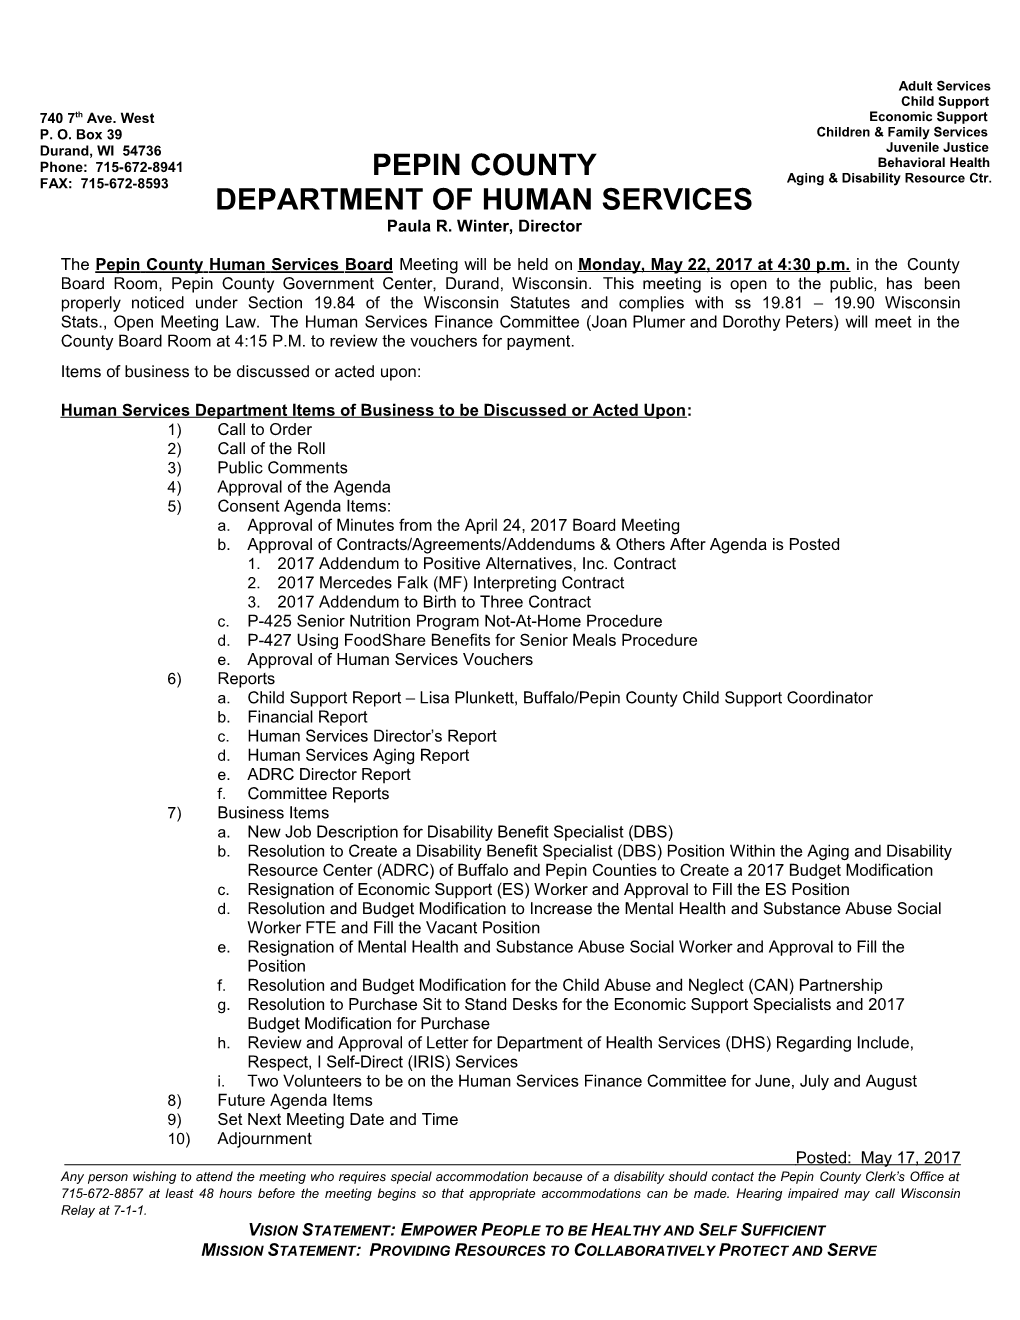 Human Services Department Items of Business to Be Discussed Or Acted Upon